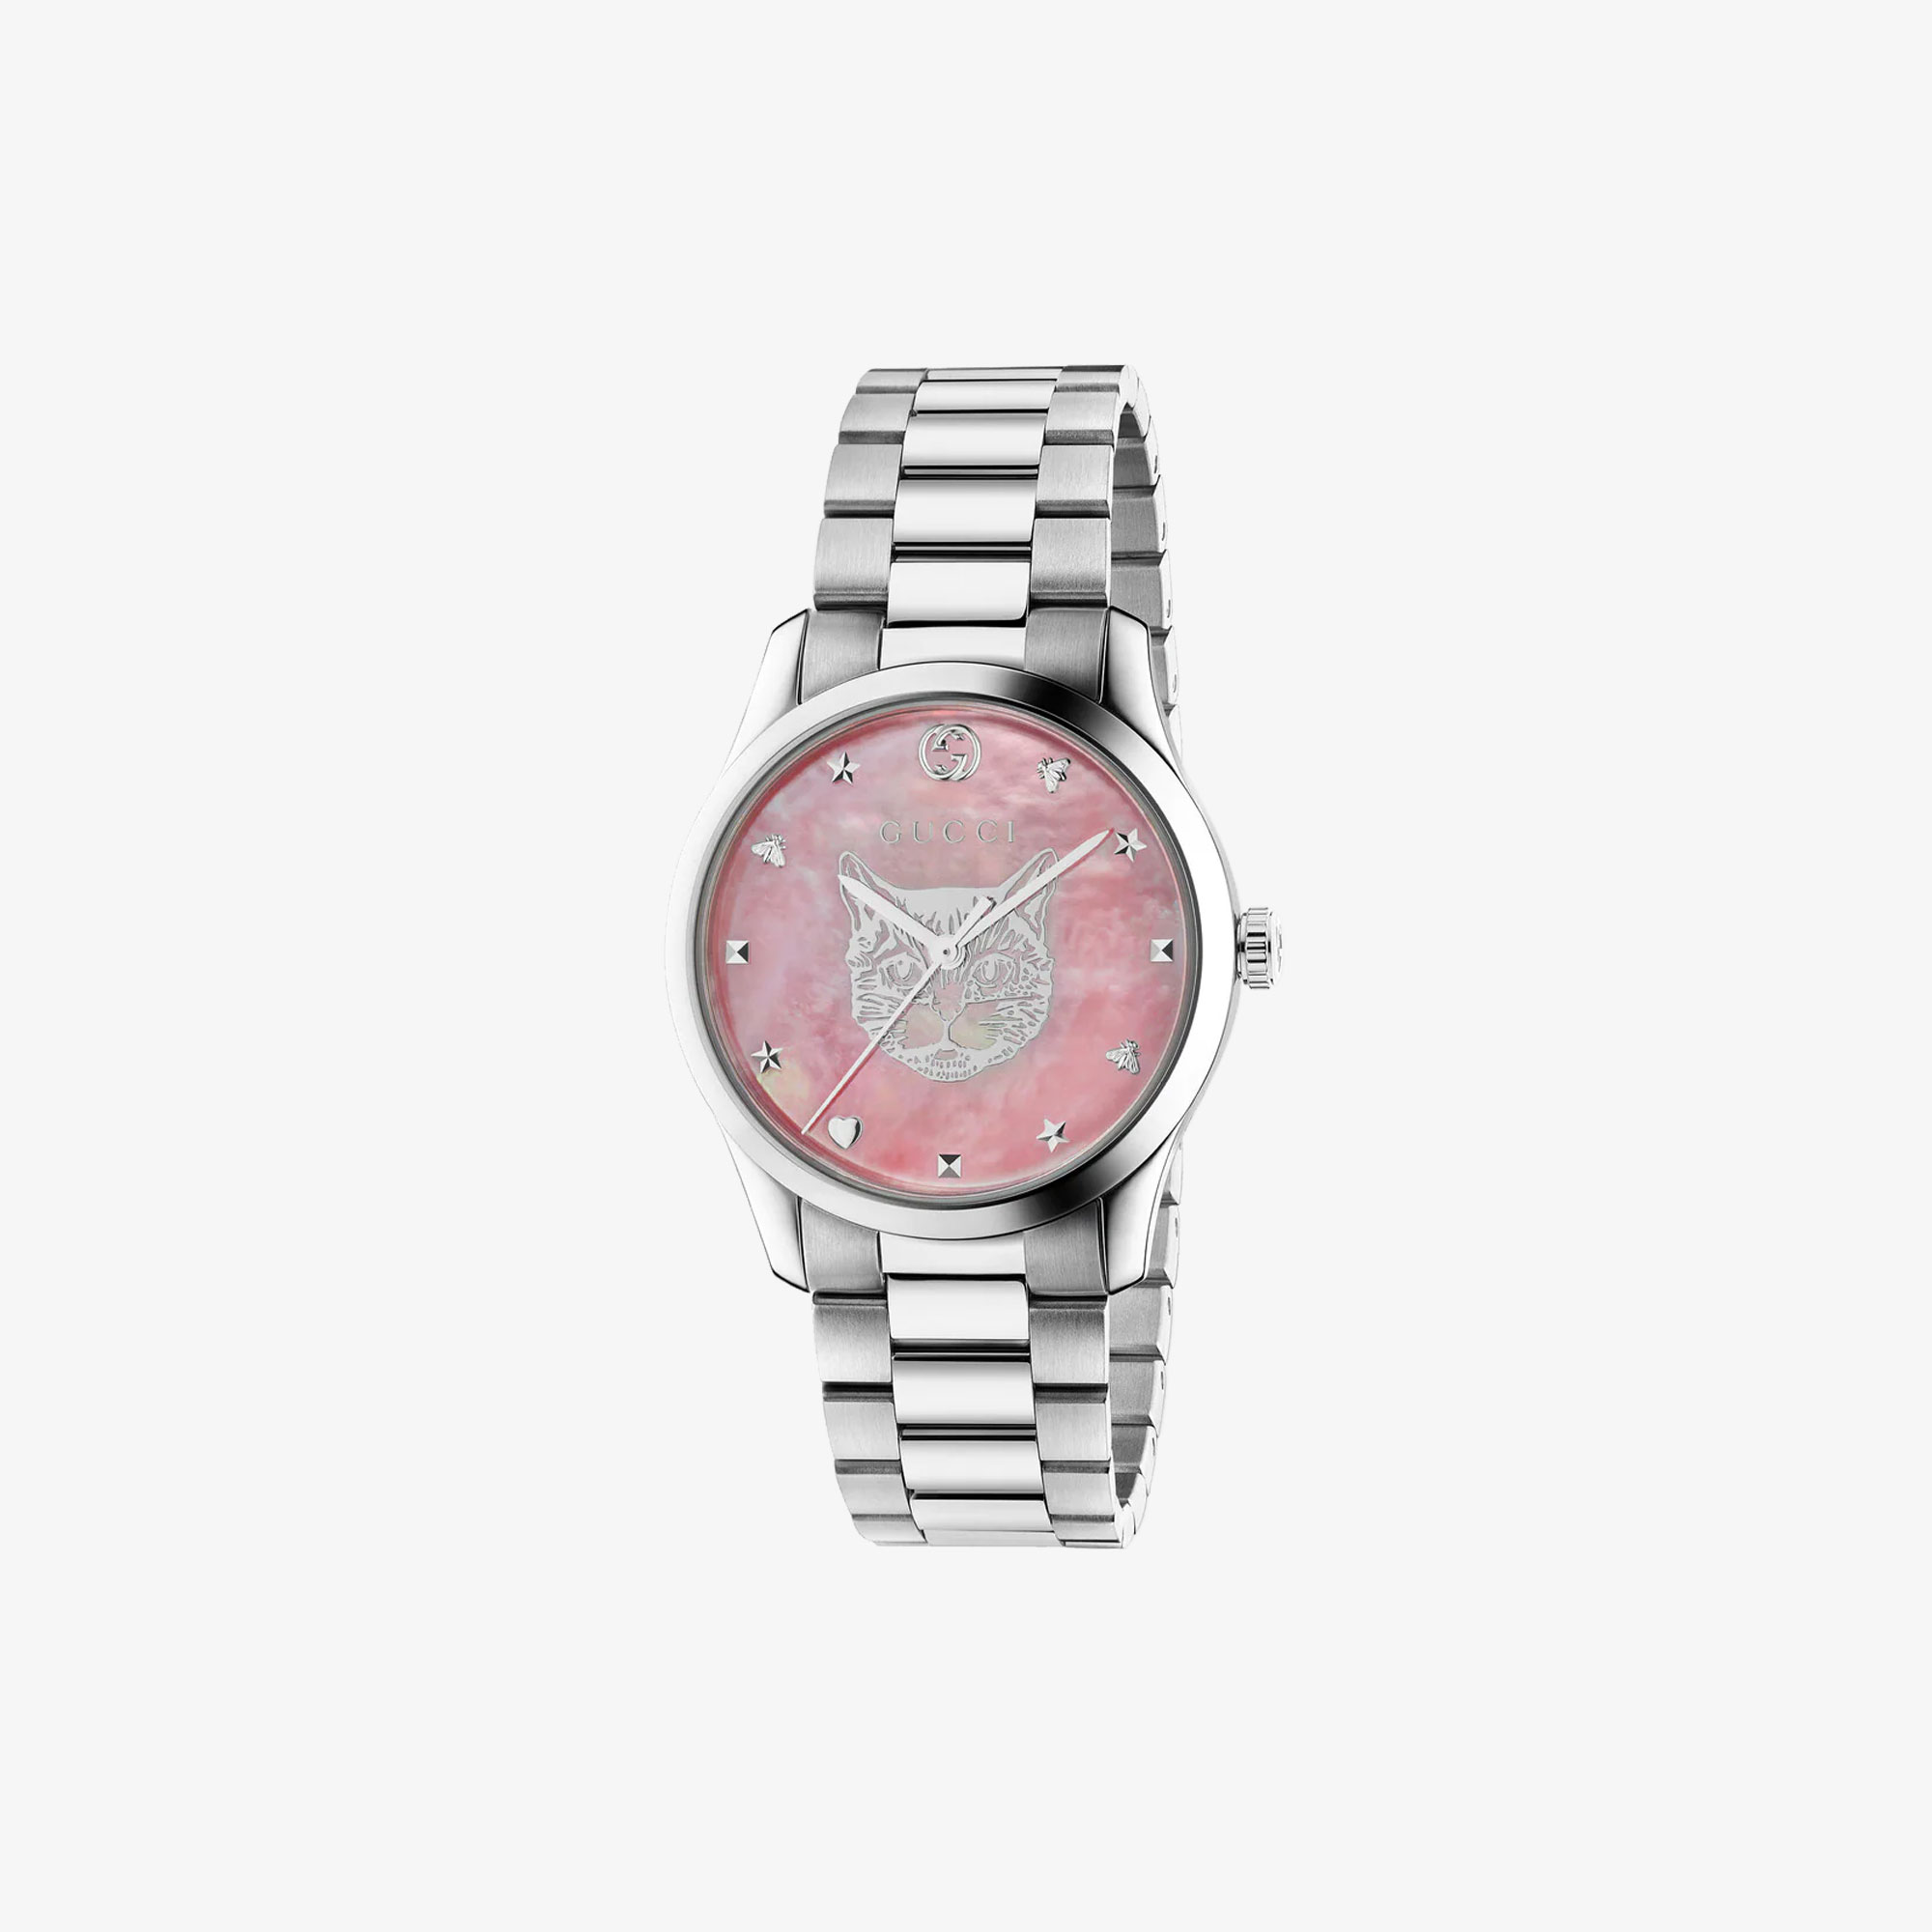 GUCCI G-TIMELESS ICONIC LADIES MYSTIC CAT